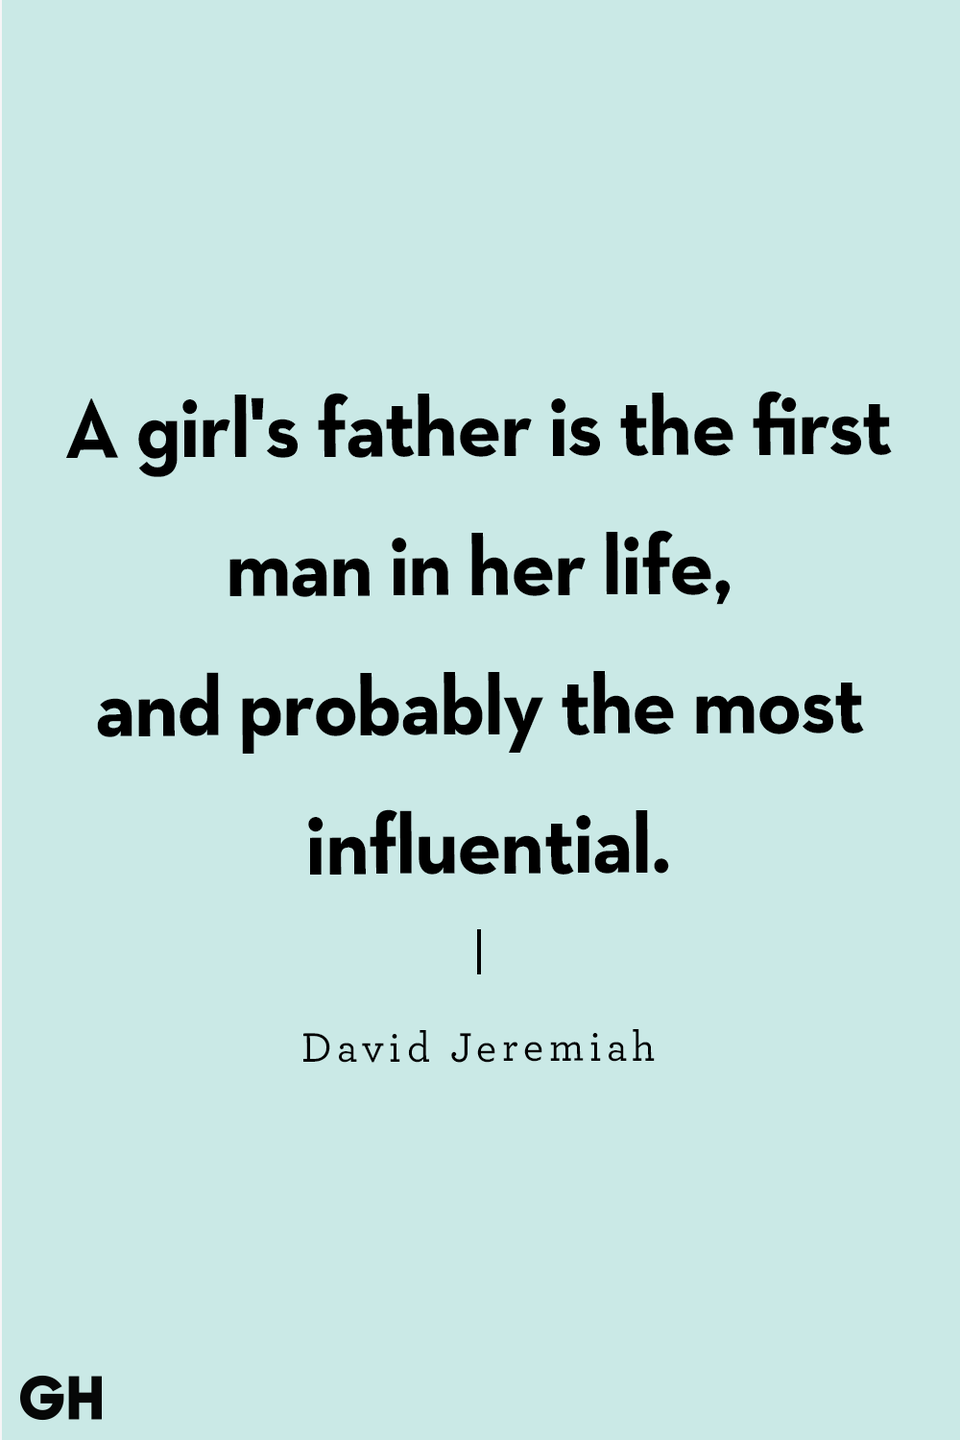 <p>"A girl's father is the first man in her life, and probably the most influential."</p>